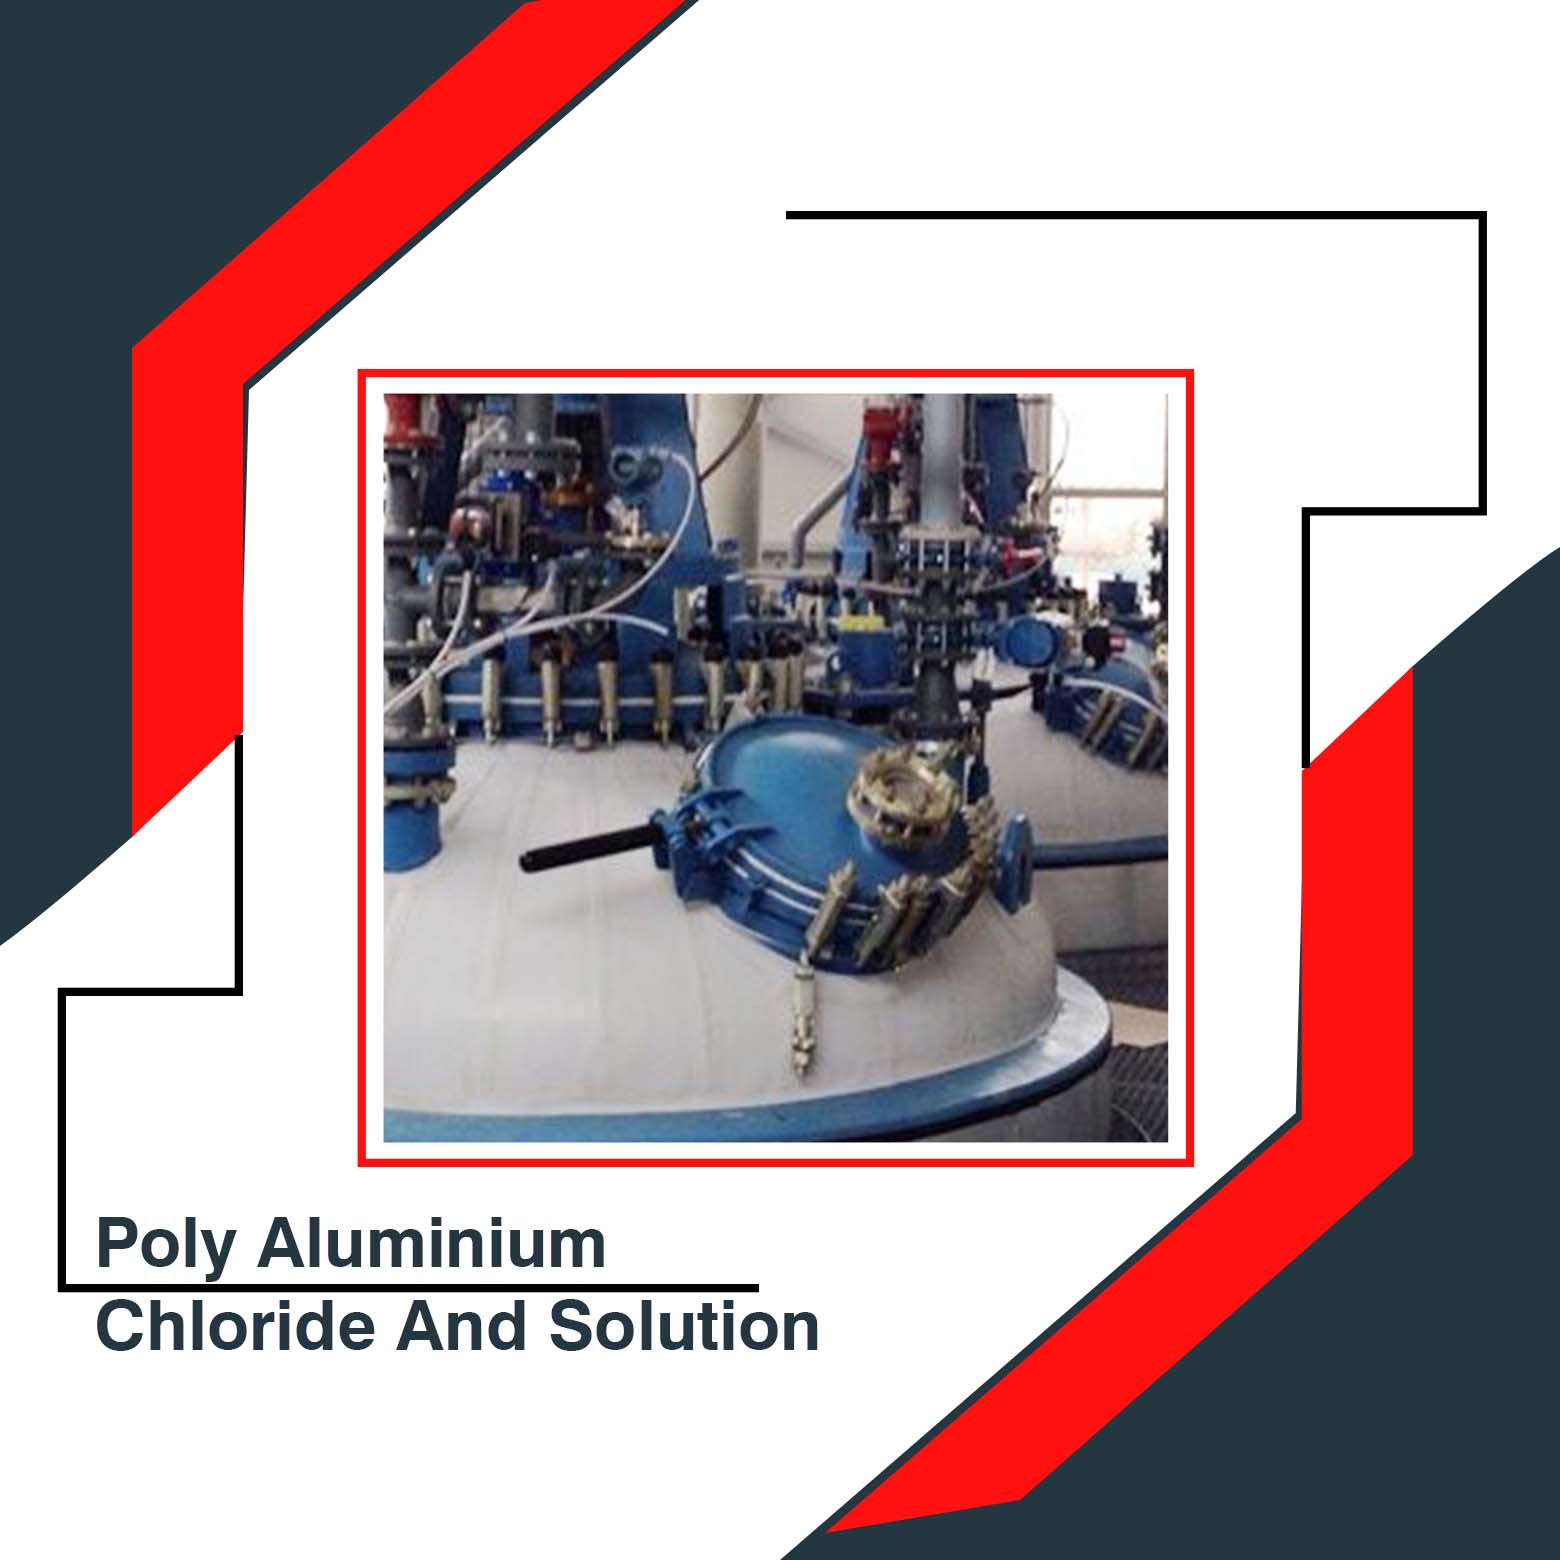 Poly Aluminium Chloride And Solution